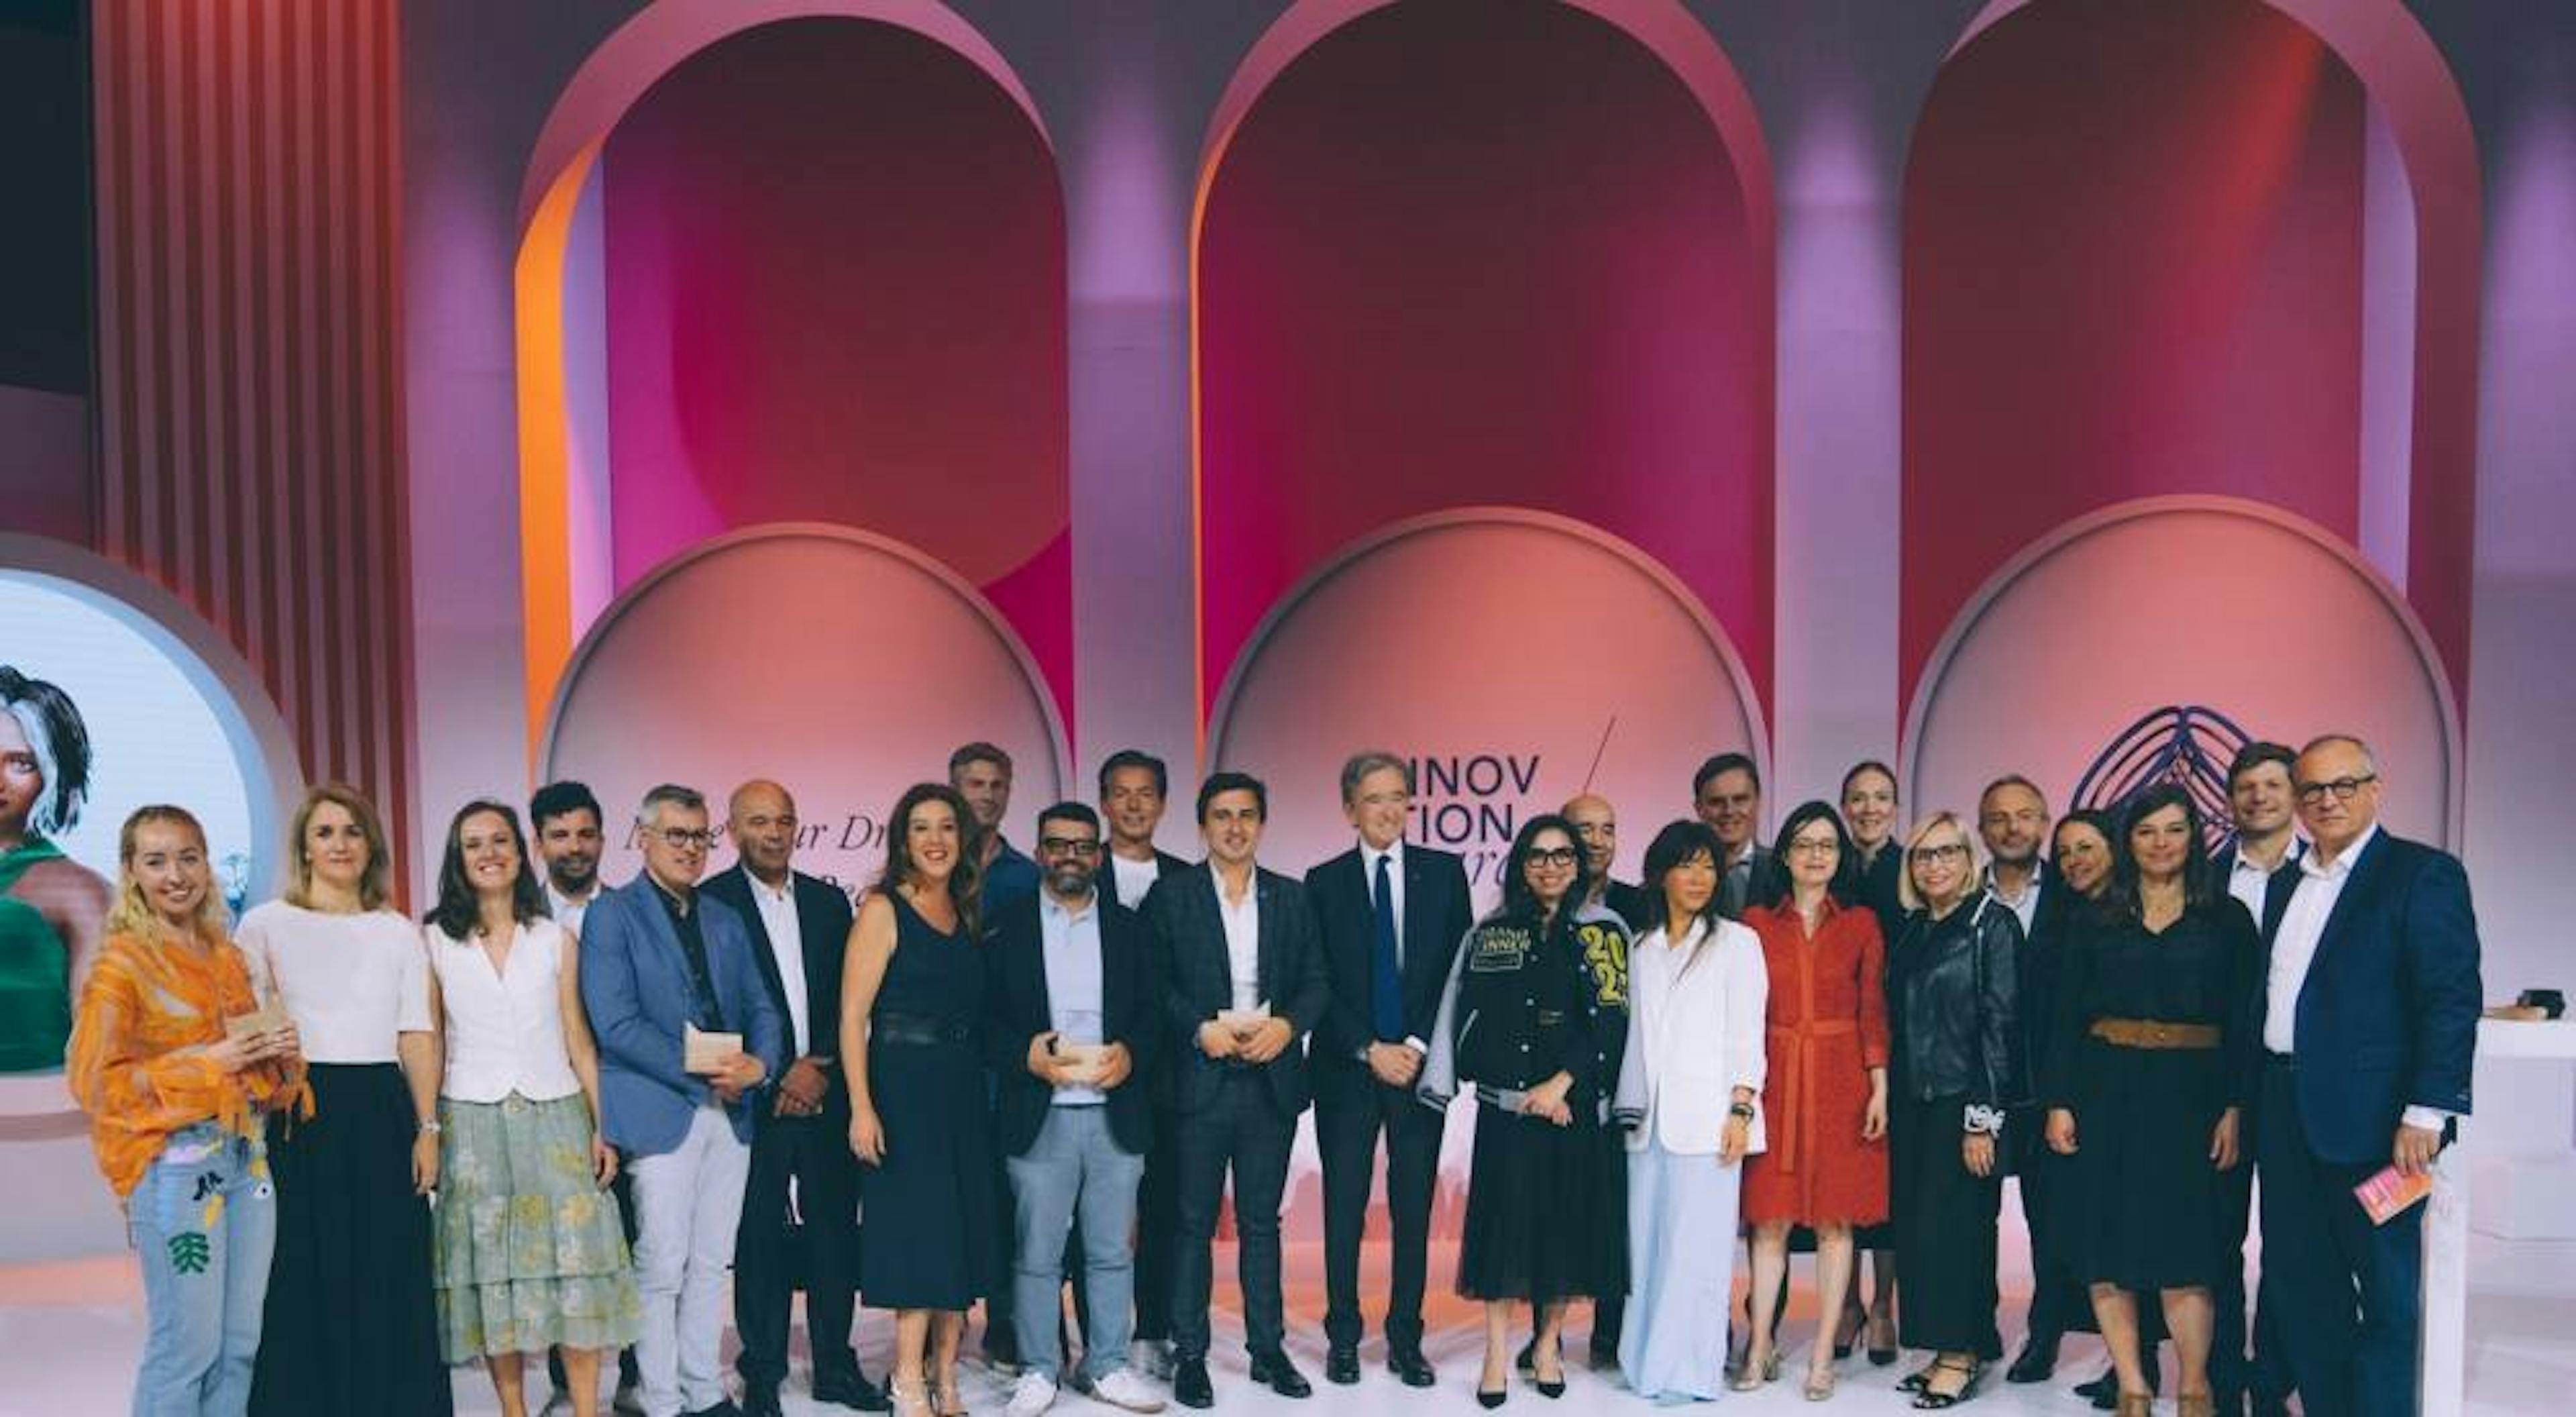 Cover Make your dreams become reality: LVMH invites startups worldwide to apply for the 8th edition of the LVMH Innovation Award